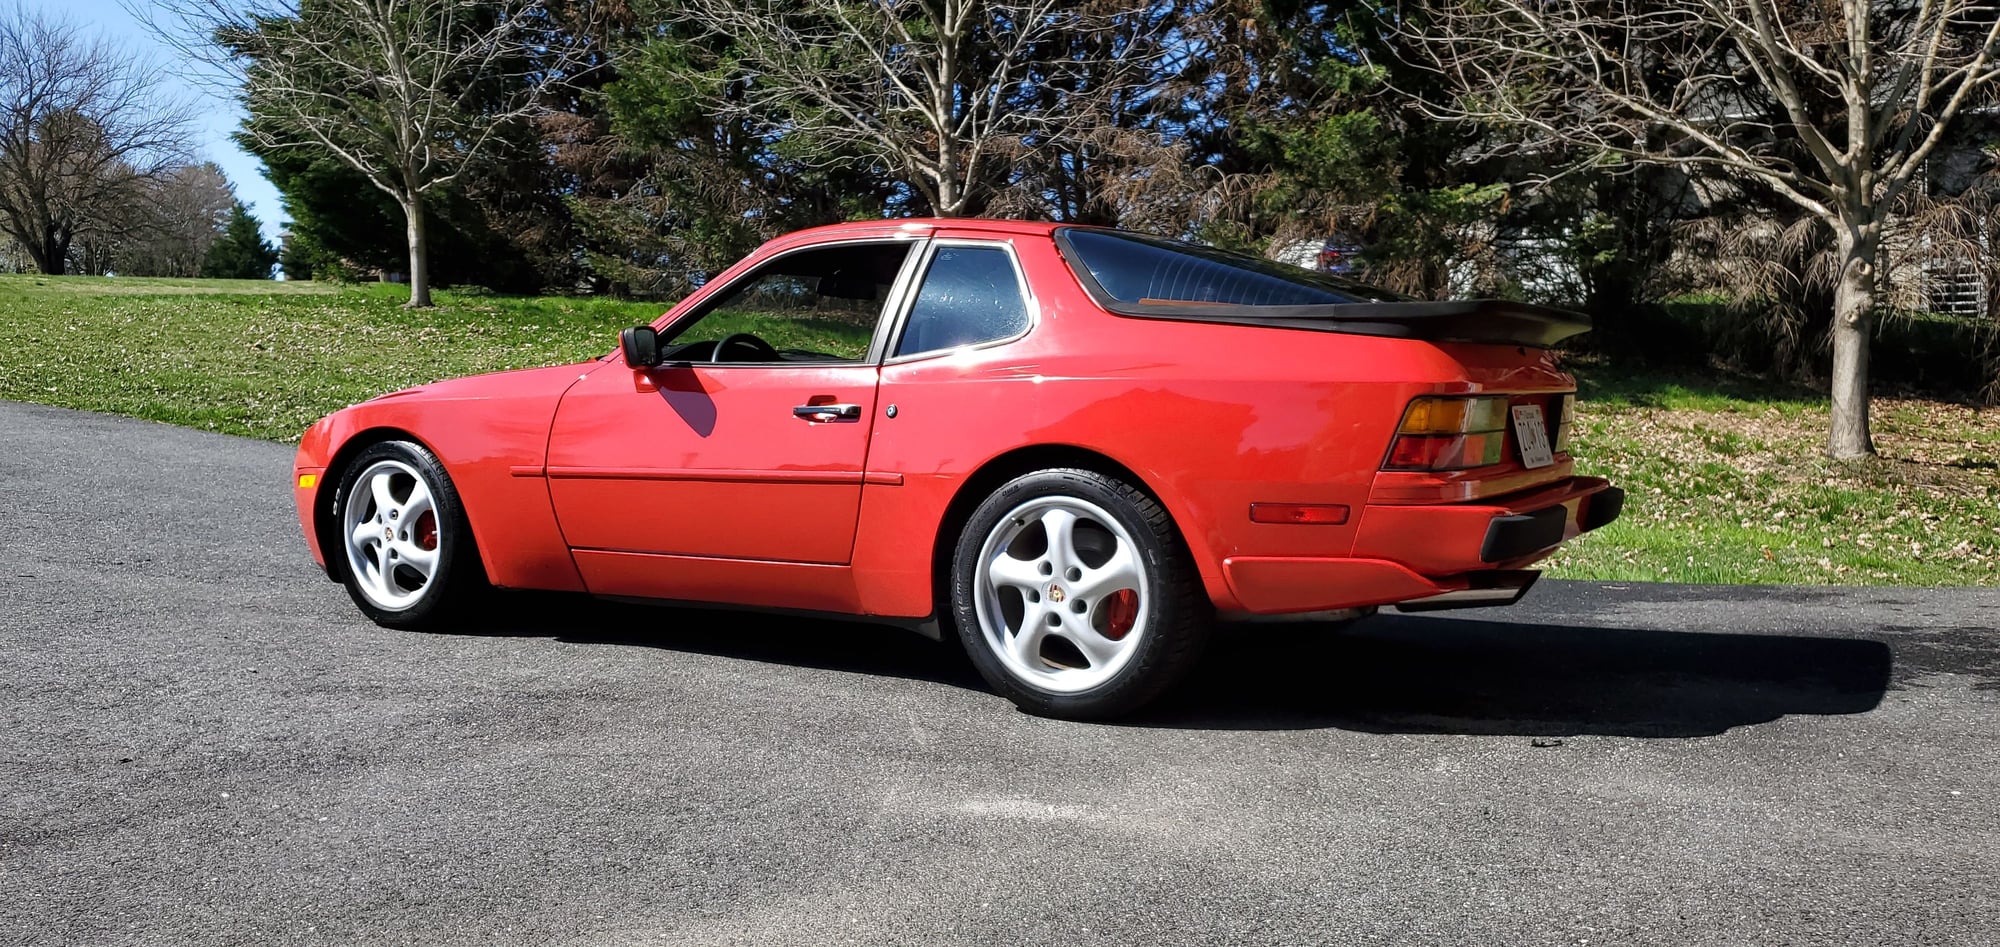 1987 Porsche 944 - 1987 944 turbo - Used - VIN WP0AA2956HN152570 - 145,000 Miles - 4 cyl - 2WD - Manual - Coupe - Red - Jarrettsville, MD 21084, United States